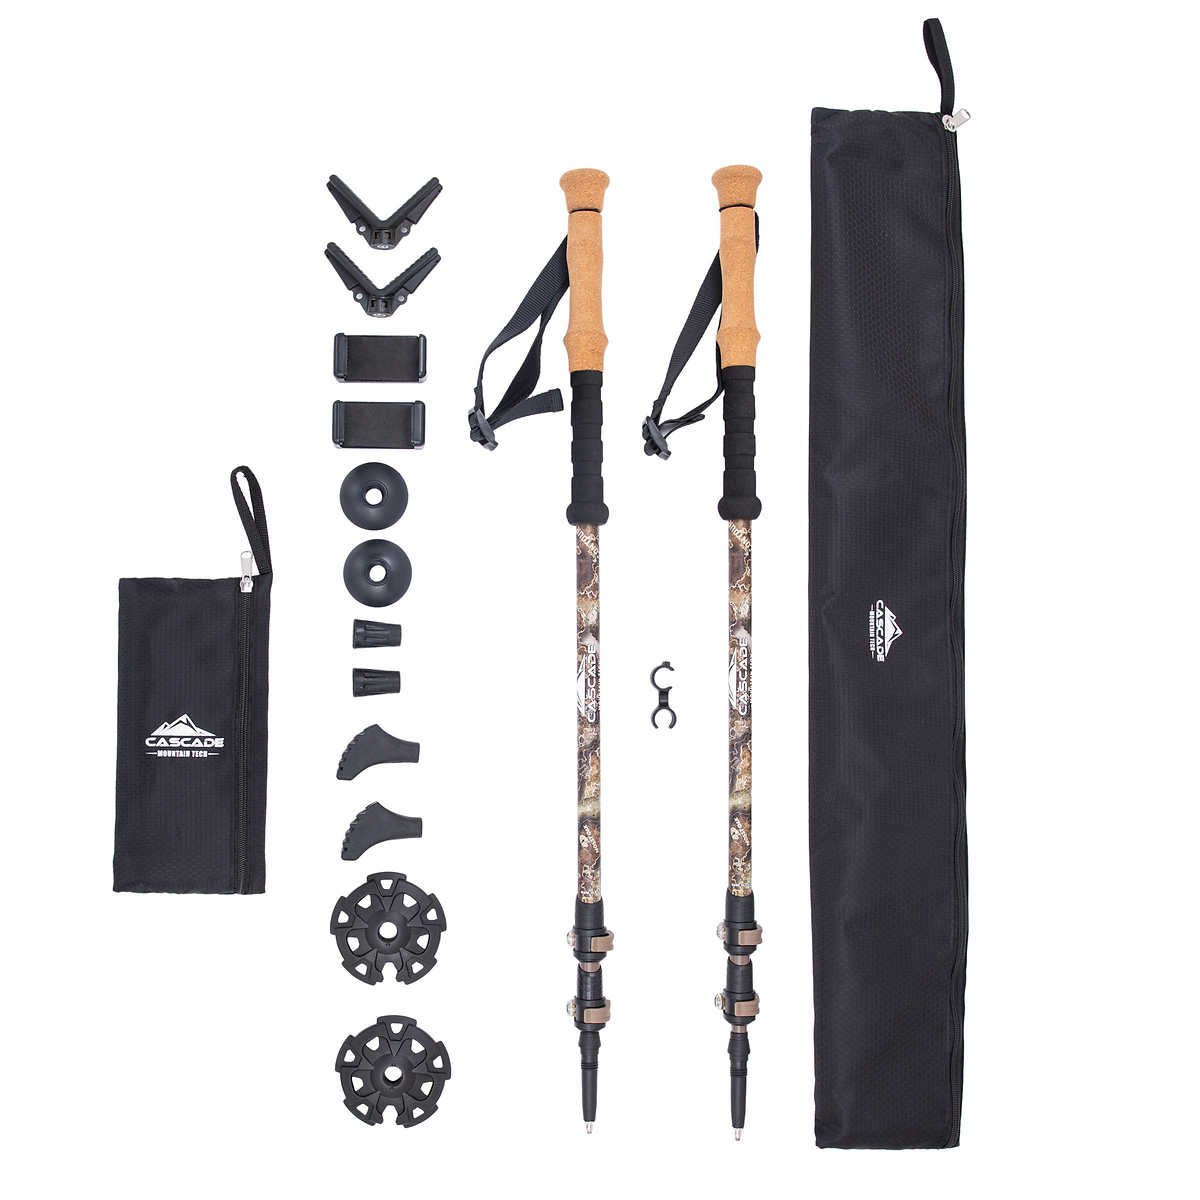 2 Mossy Oak Monopods with Accessories